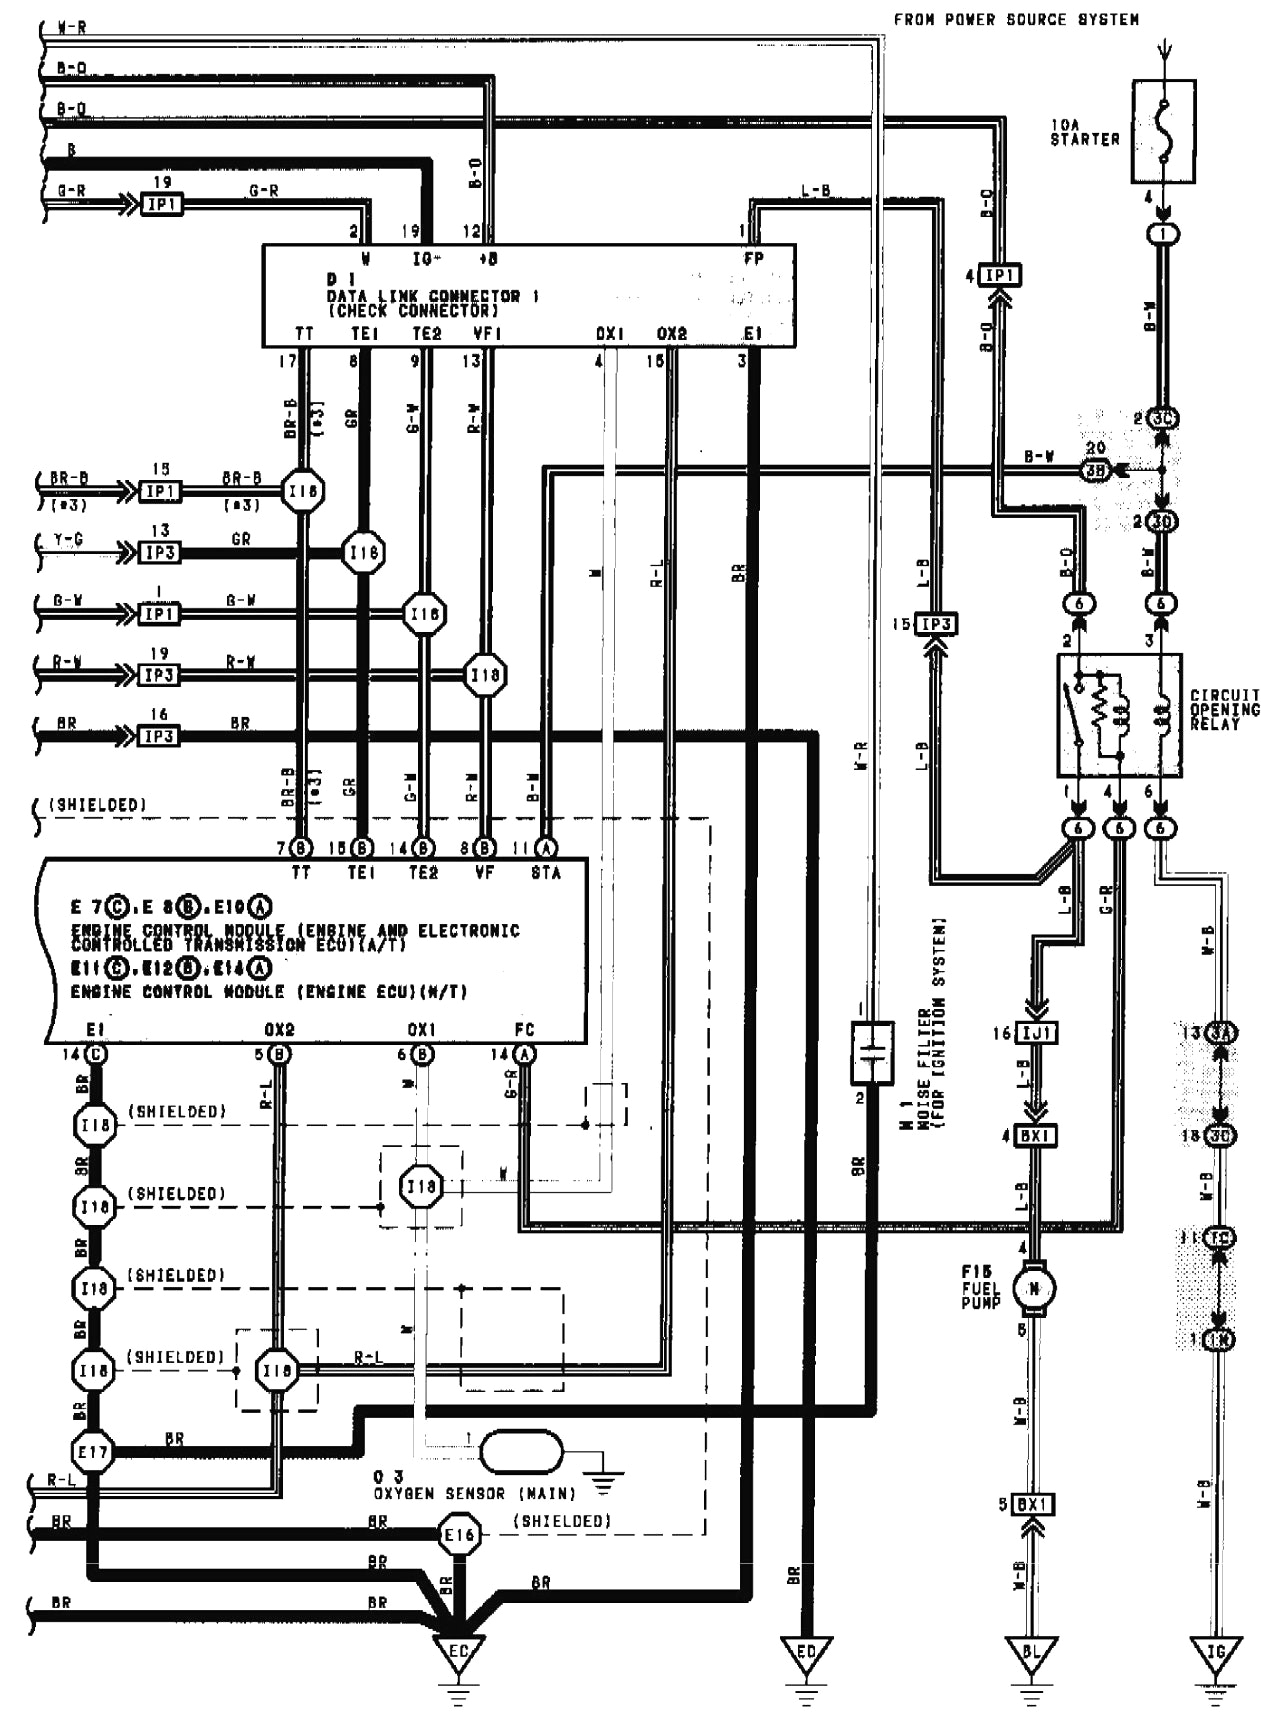 1992 toyota camry radio wiring diagram lovely 1996 toyota camry stereo wiring harness diagrams adorable diagram jpg